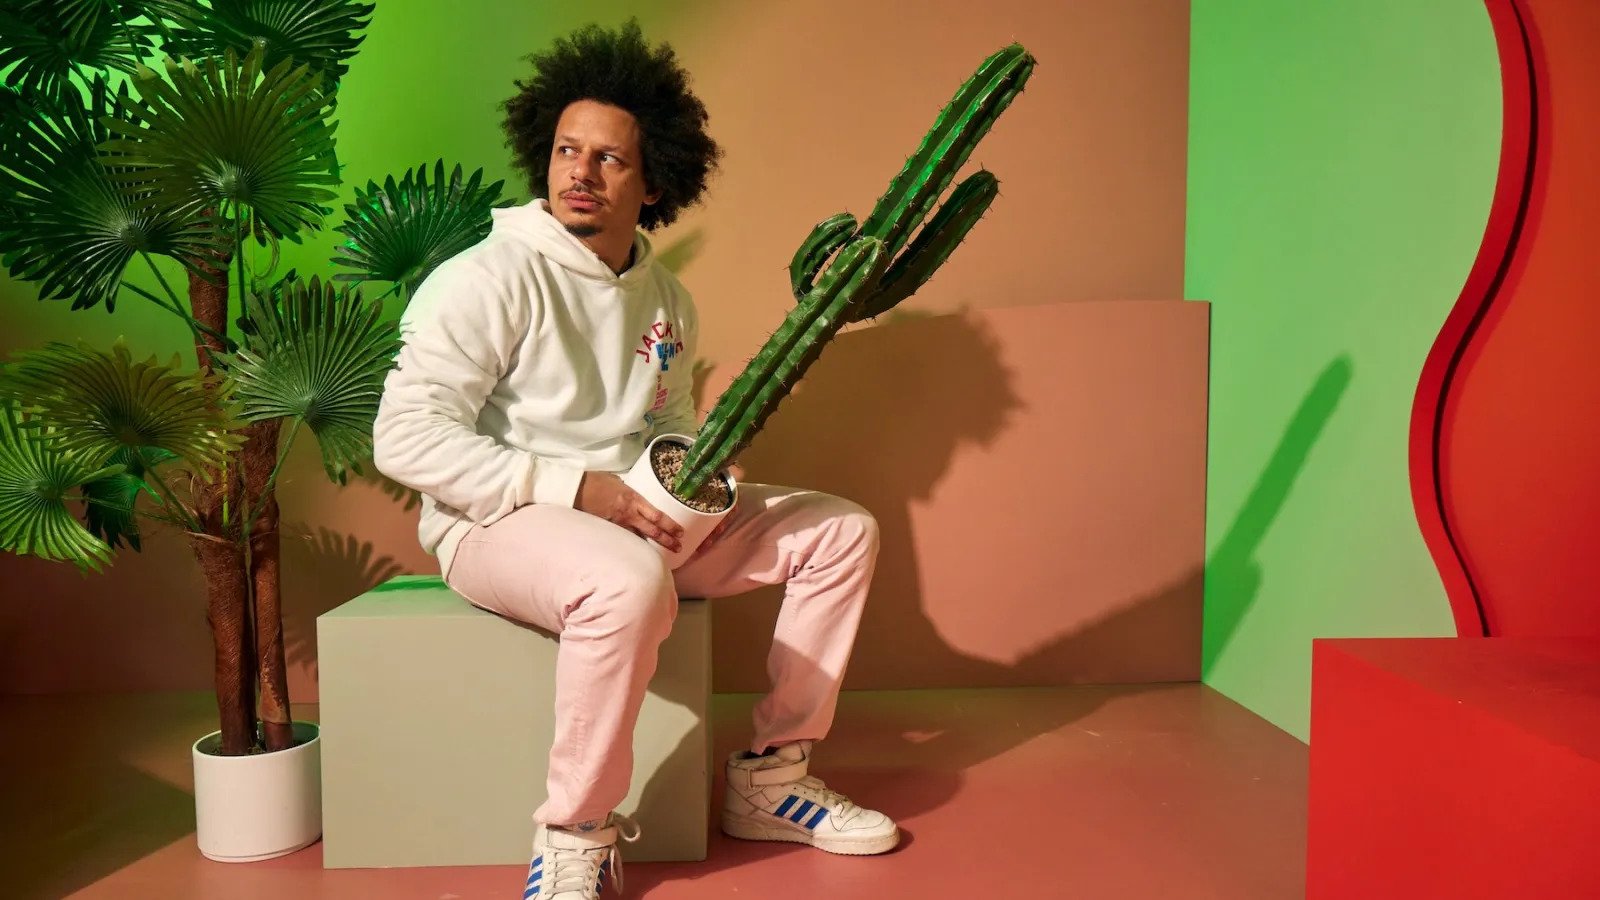 47 Facts About Eric Andre - Facts.net